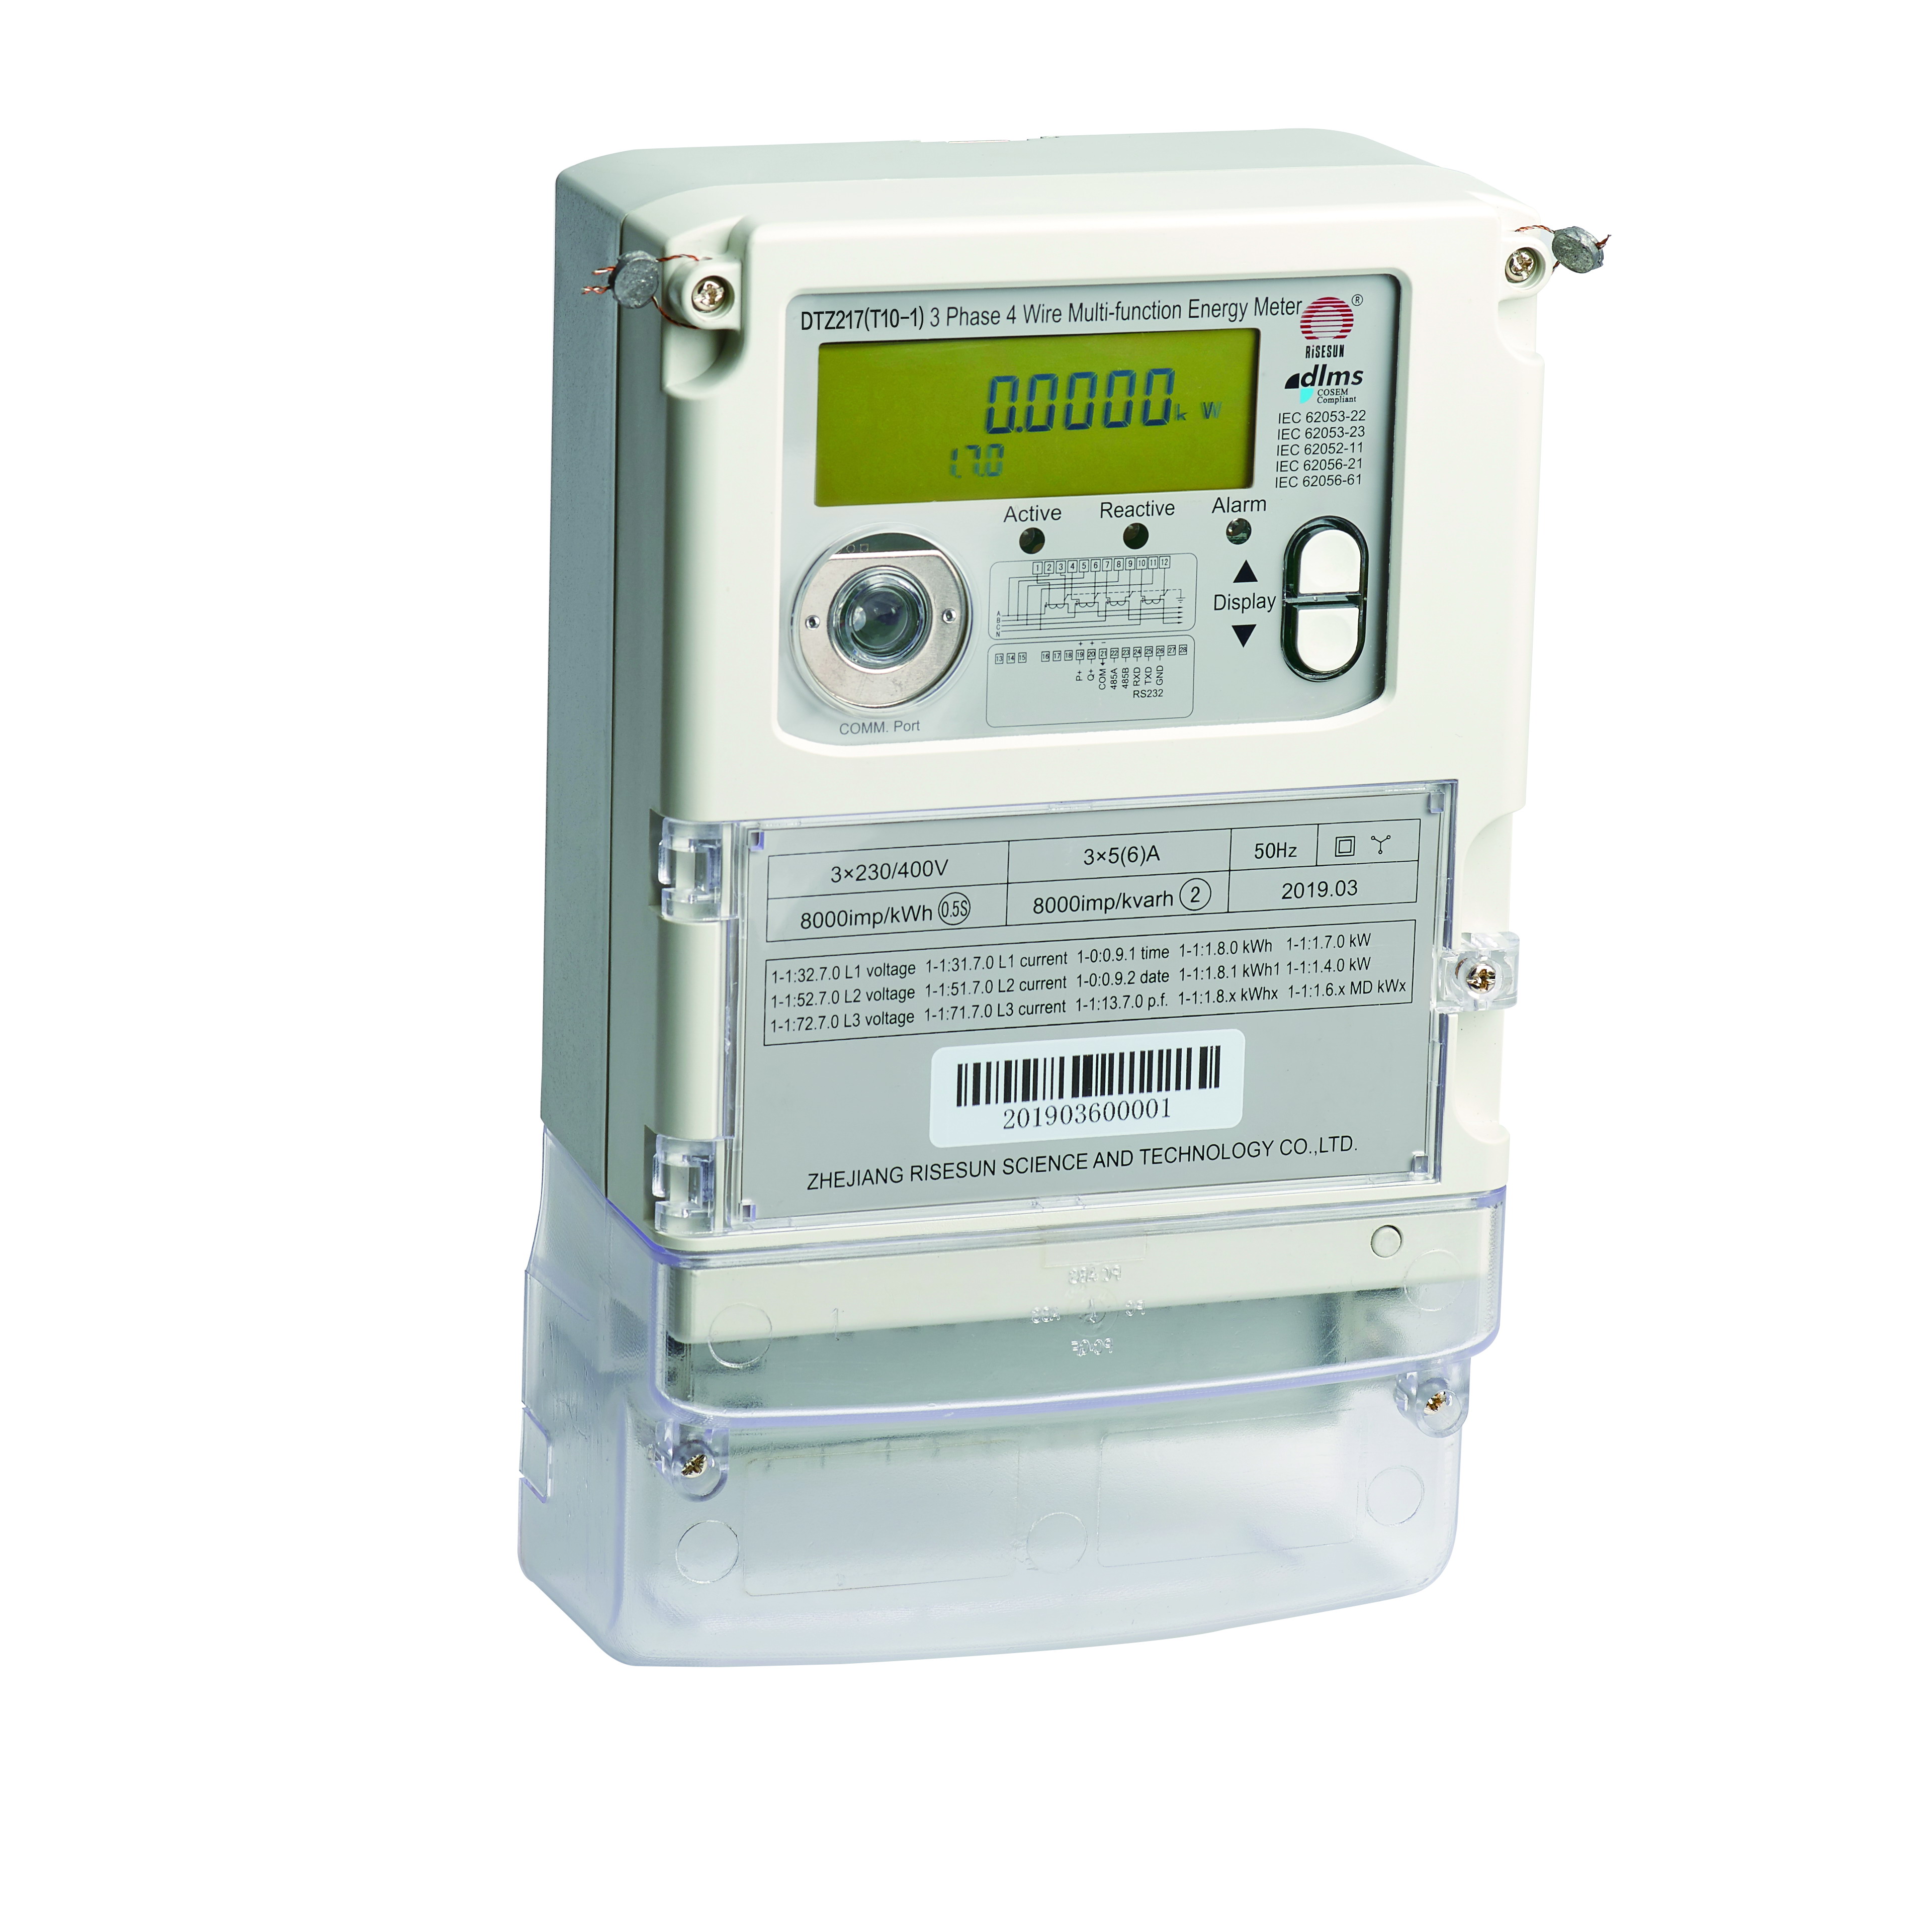 Three Phase Four Wire Multifunction Electronic Energy Meter